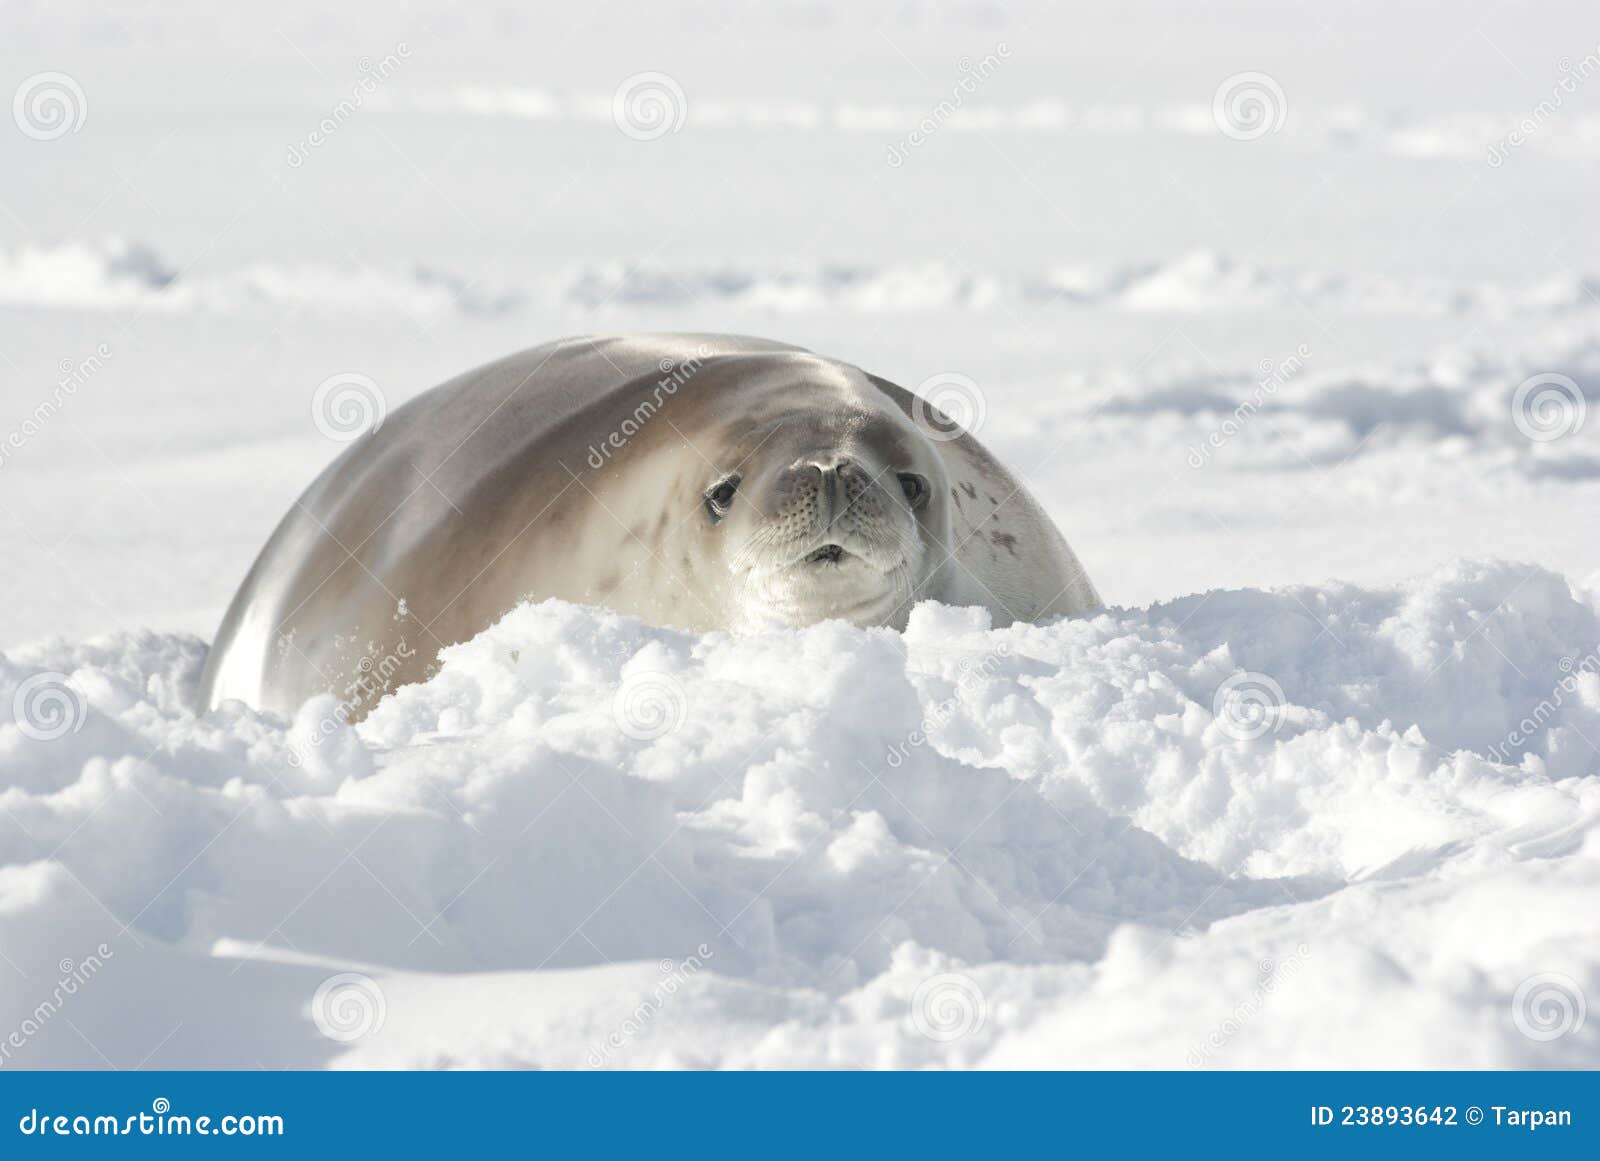 crabeater seals lying in the snow.